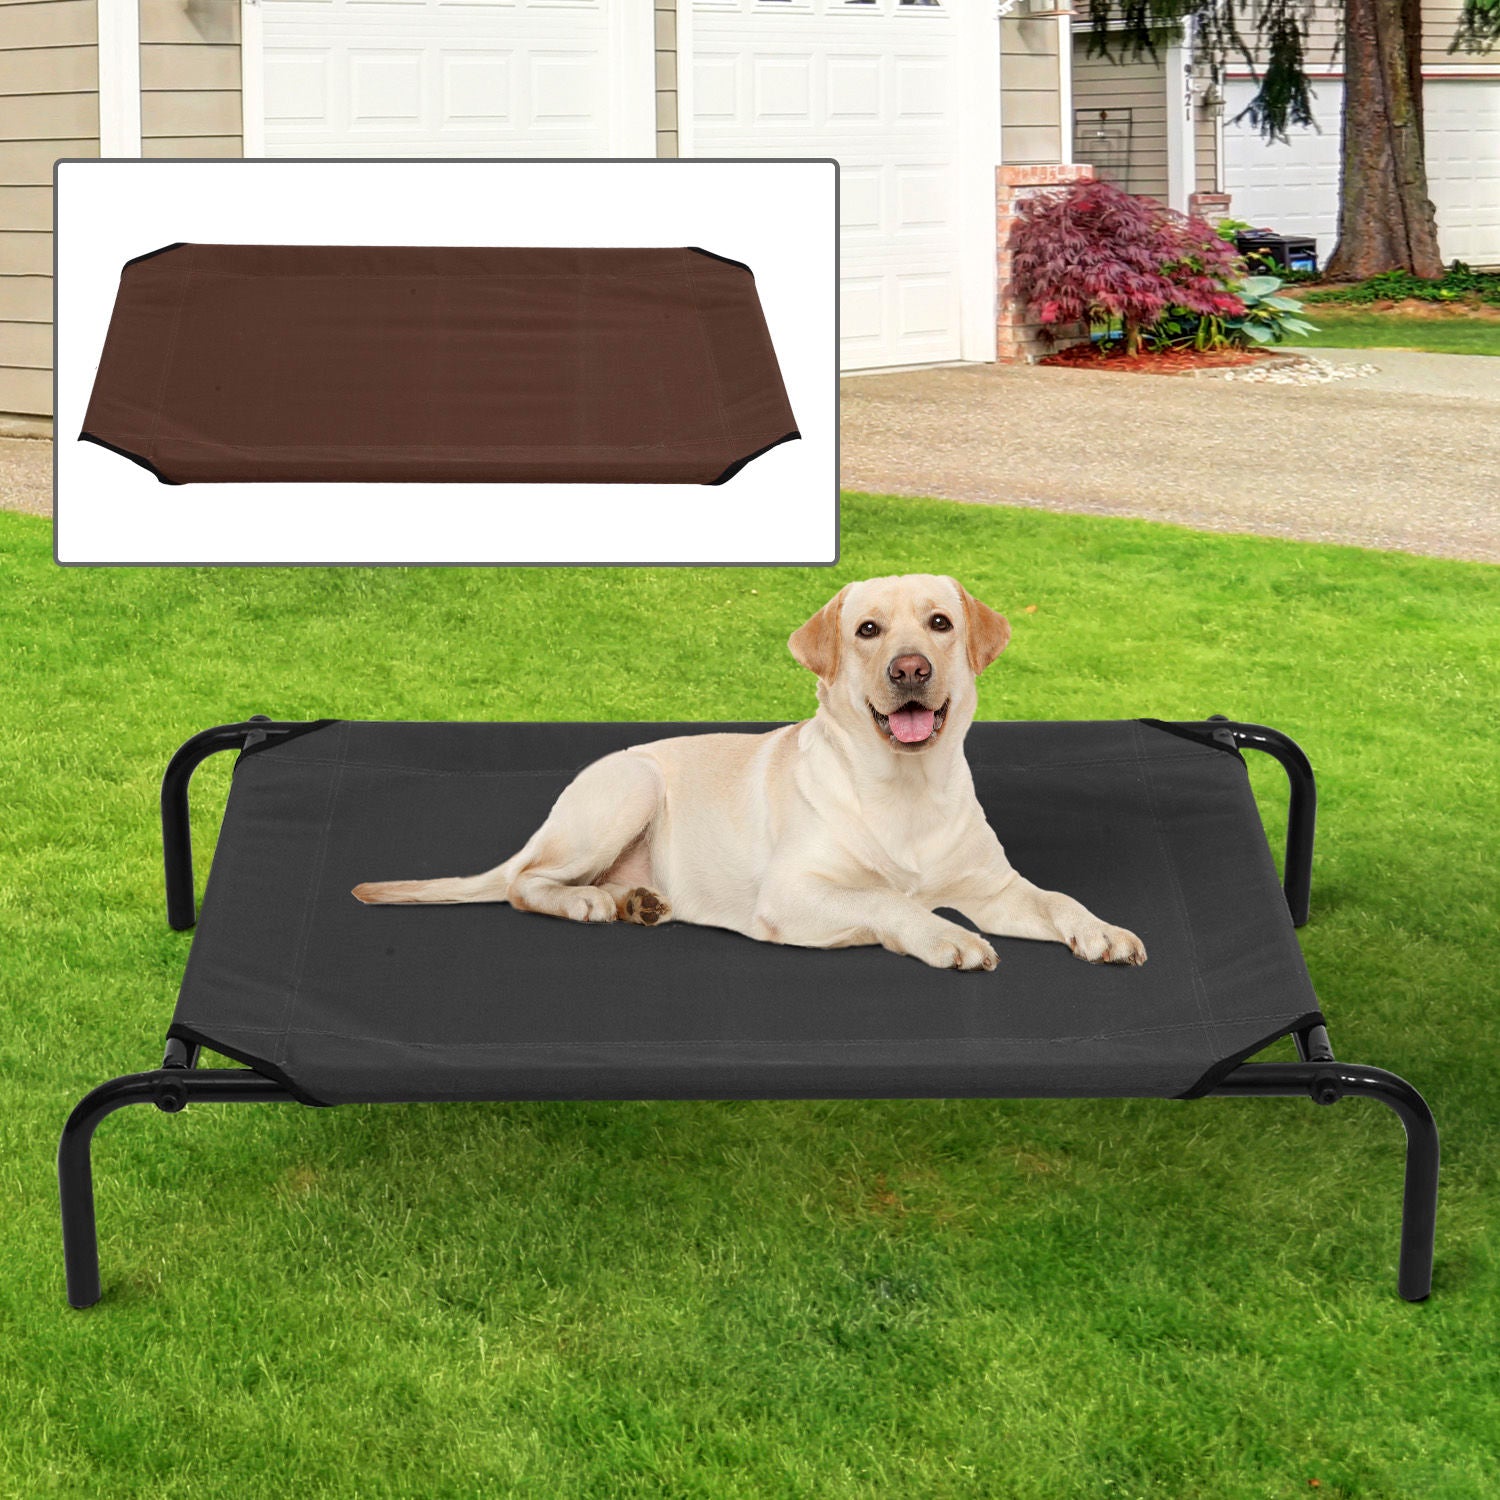 Nancy's Porters Dog Bed Outdoor Dog Bed Cat Bed with Mesh Pet Bed Sleeping Place